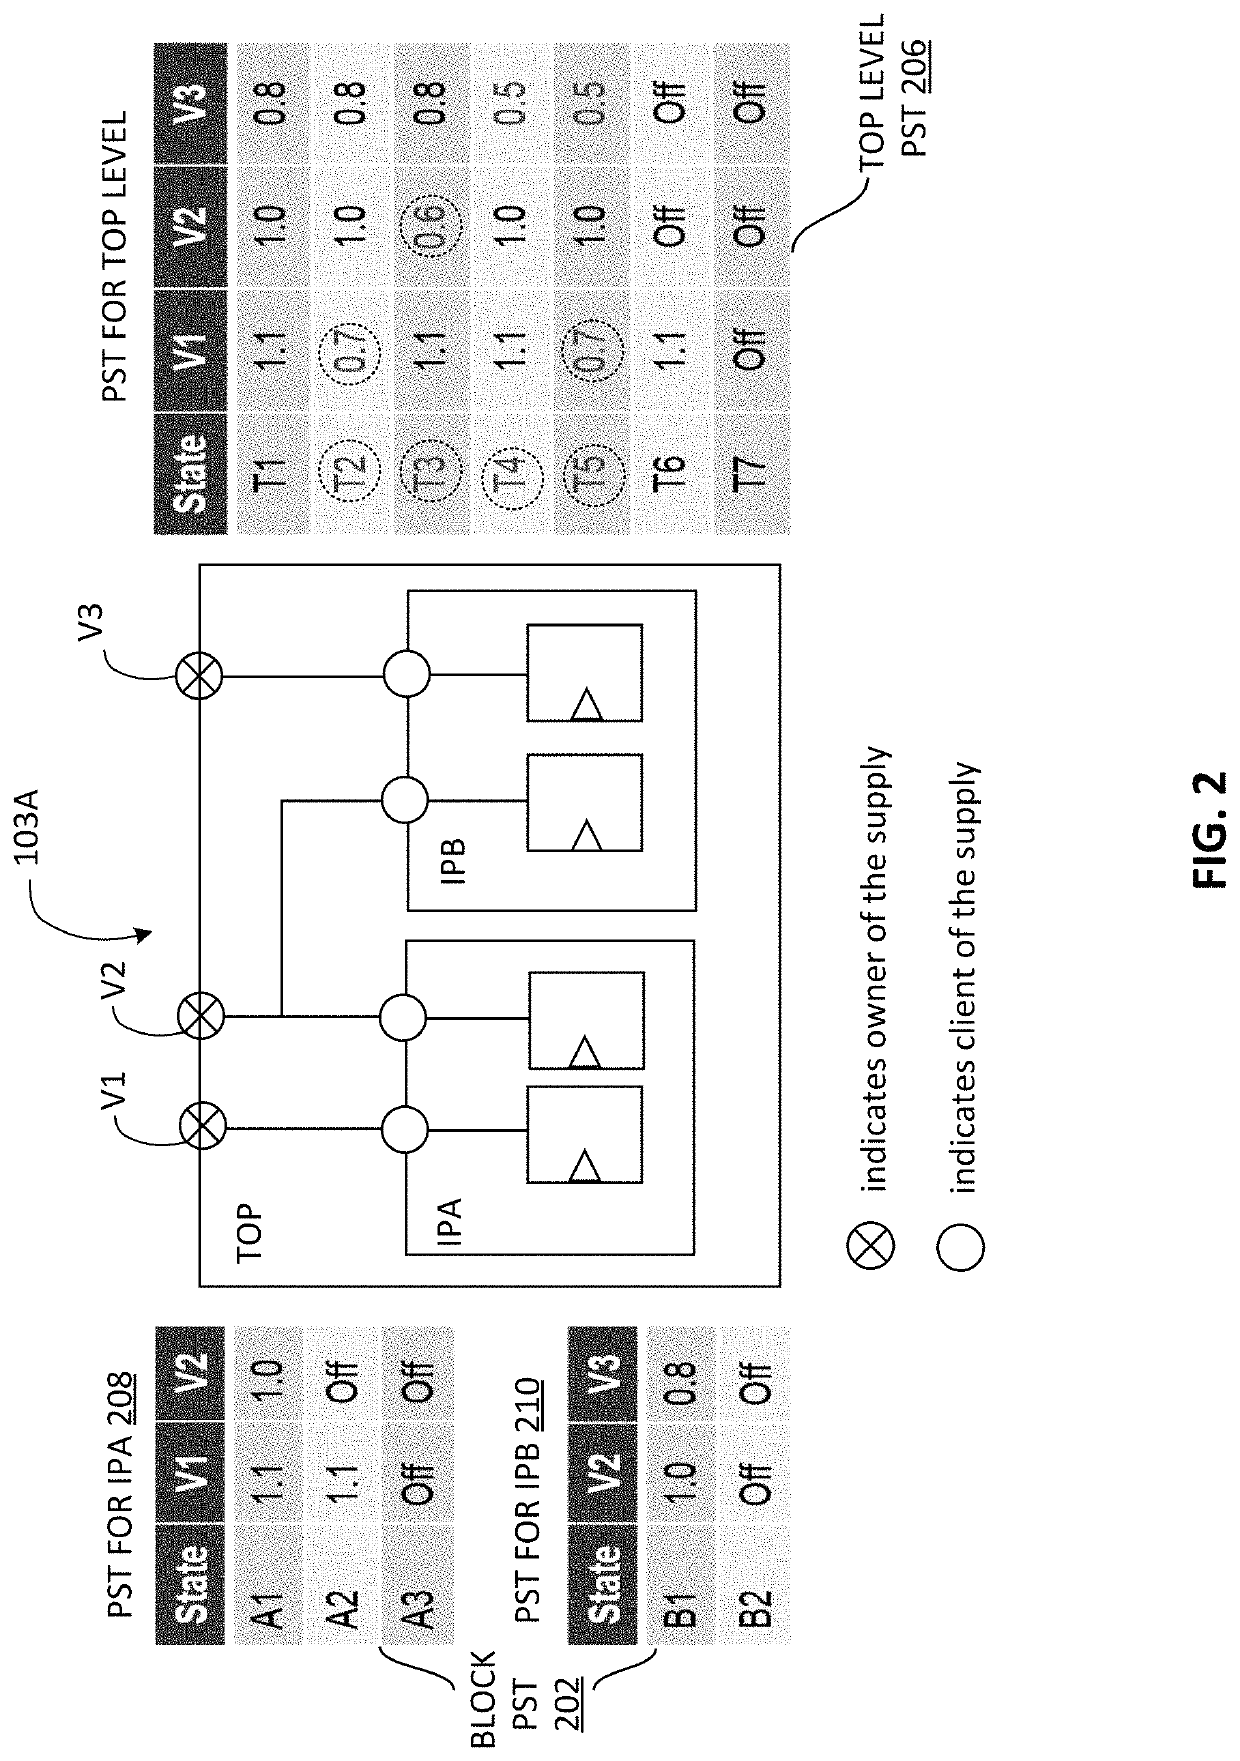 Voltage reconciliation in multi-level power managed systems